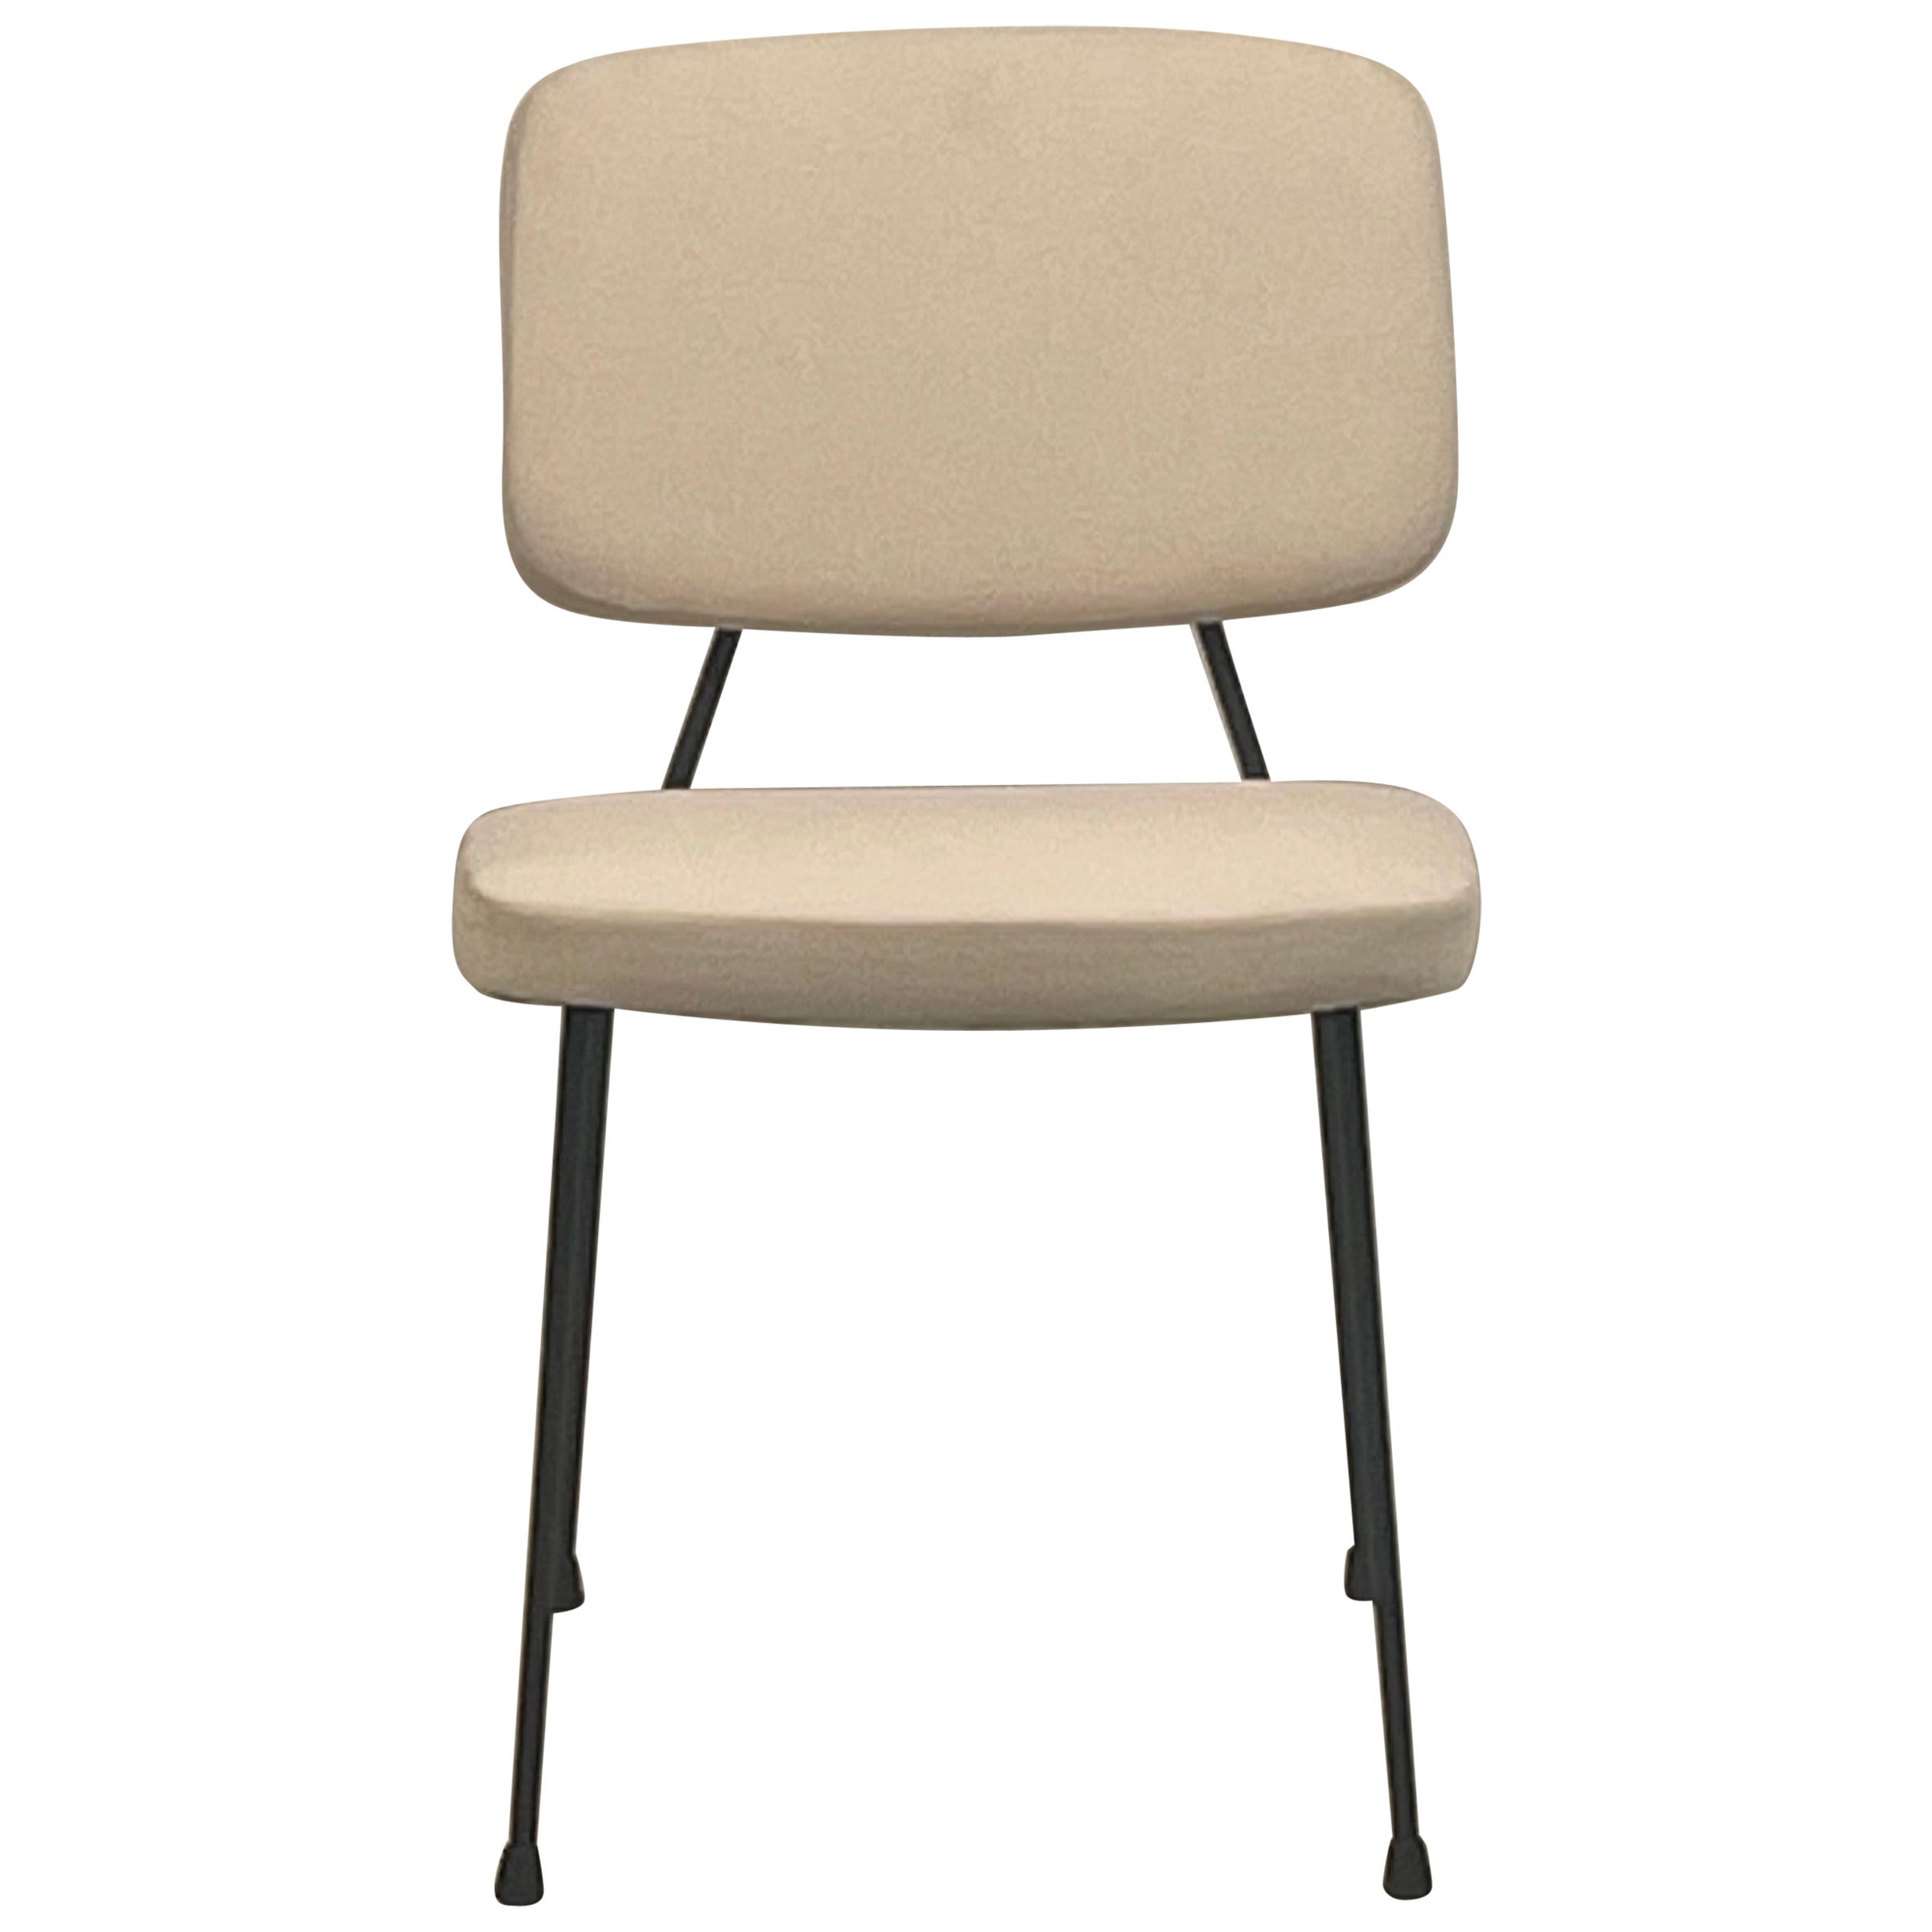 'Décade' Side or Dining Chair by Design Frères